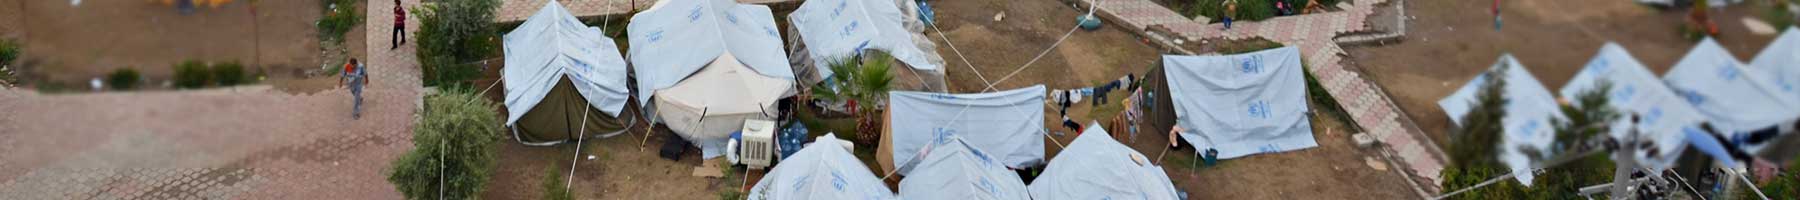 white tents in a refugee camp